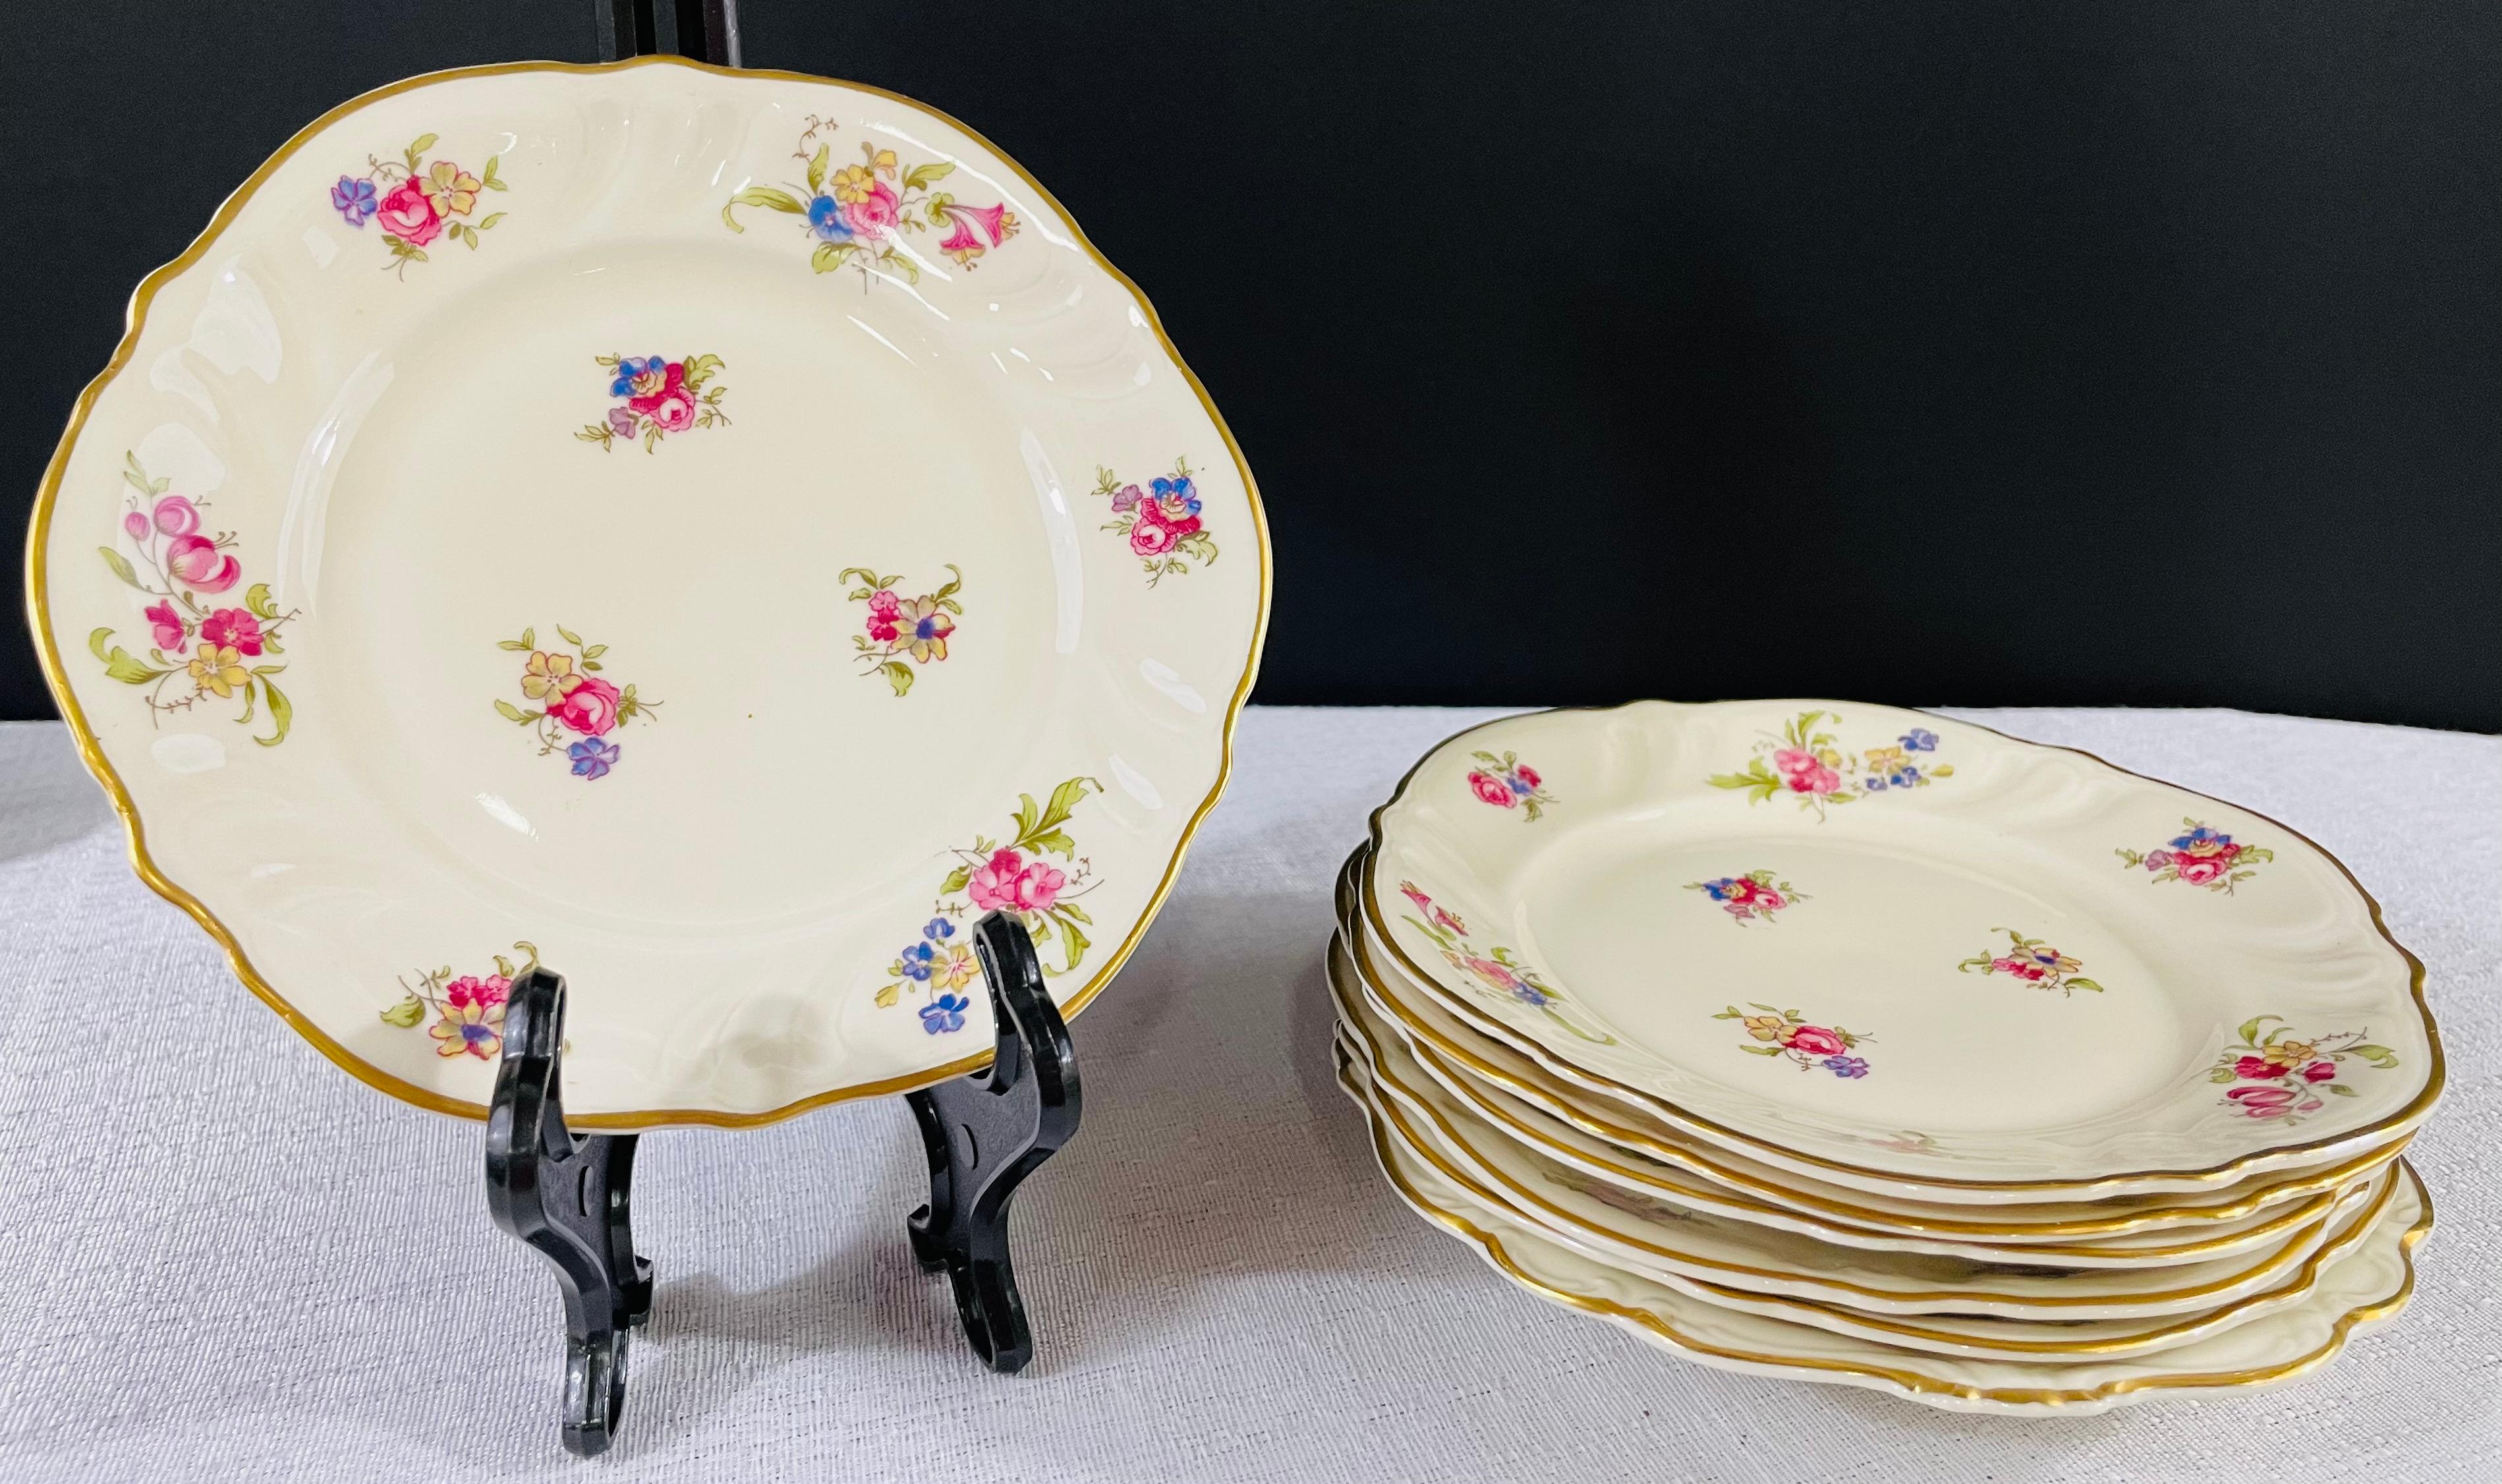 1930's Rosenthal Kronach Viktoria Lombul gold trim German porcelain large coffee set of 27 pieces decorated in a floral prink rose motif on white. Each piece is signed Rosenthal Kronach Viktoria in the bottom with the Rosenthal symbol. 

The set